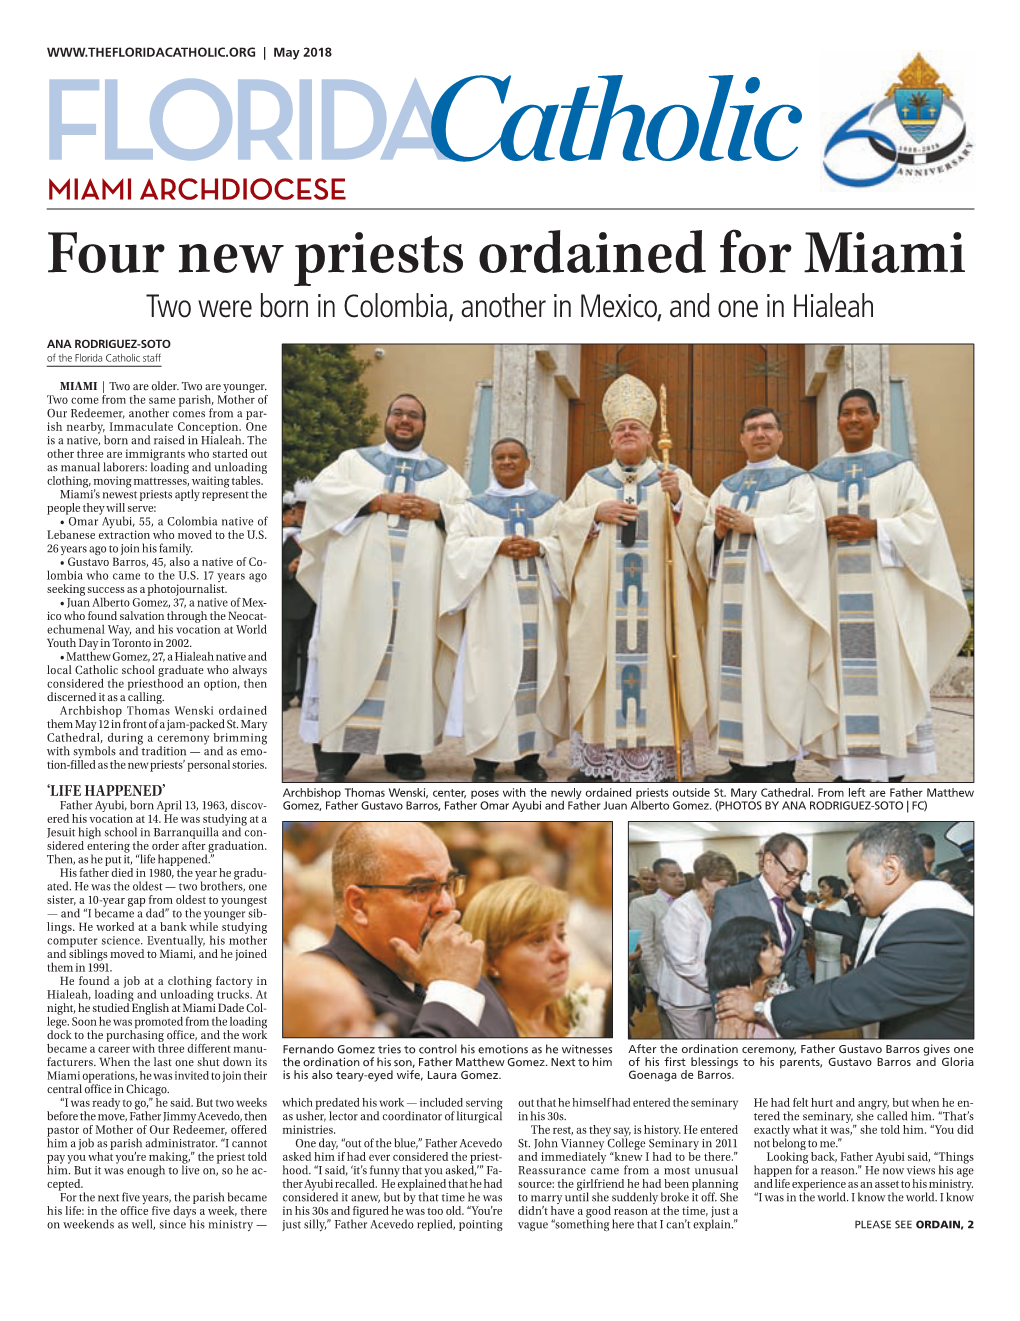 Four New Priests Ordained for Miami Two Were Born in Colombia, Another in Mexico, and One in Hialeah